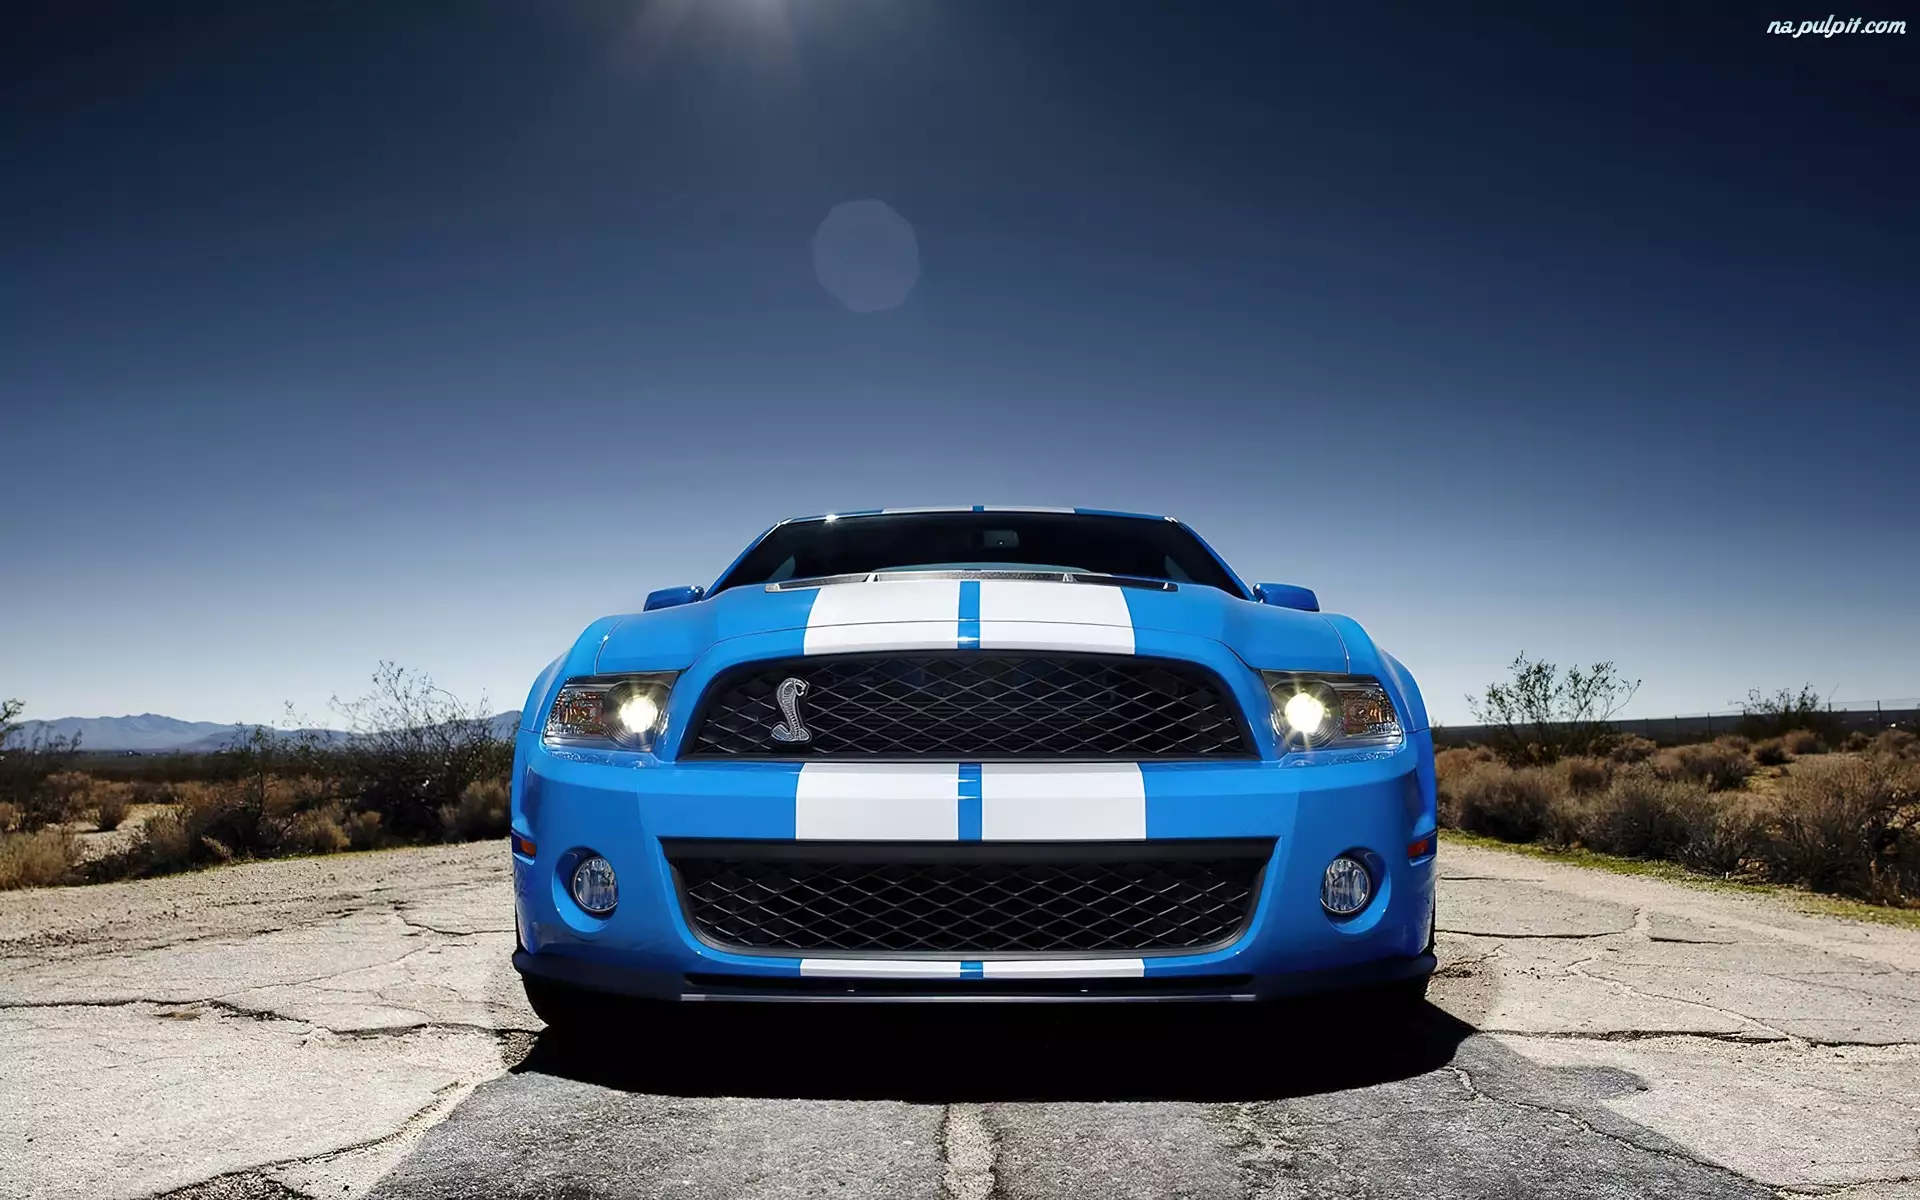 Ford Mustang, Shelby